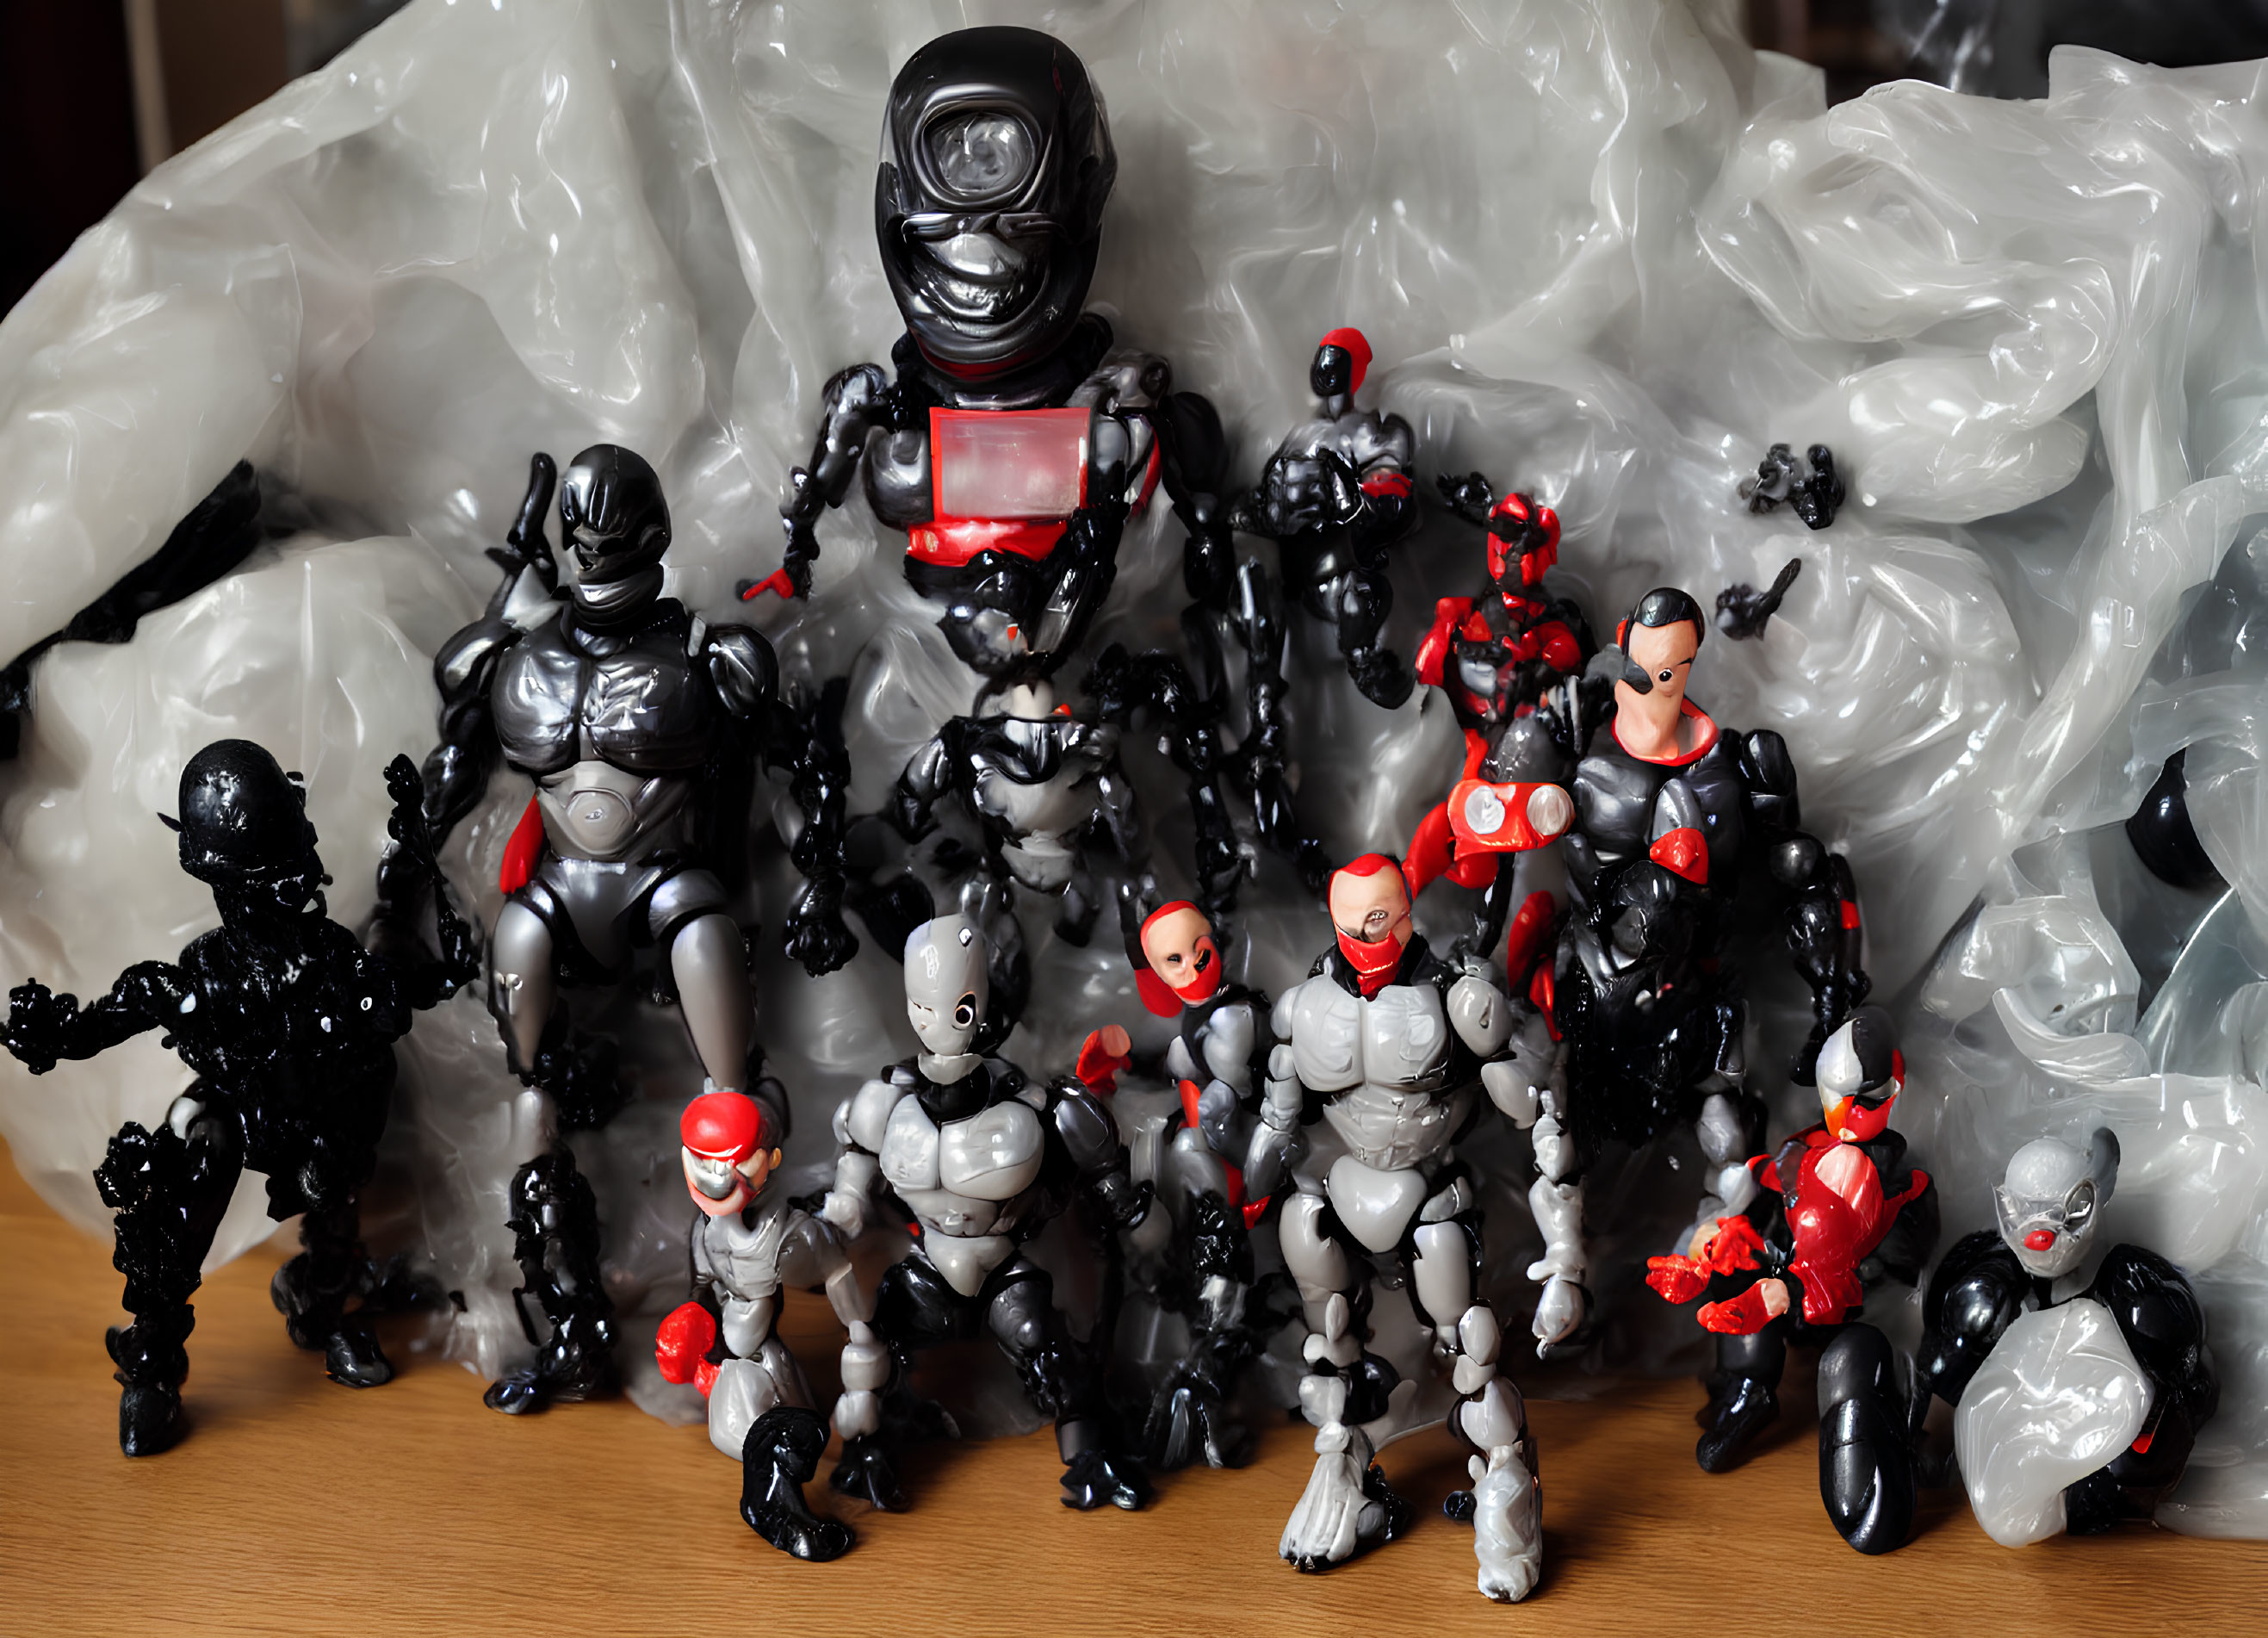 Assorted black, red, and grey action figures on wooden surface with plastic bags